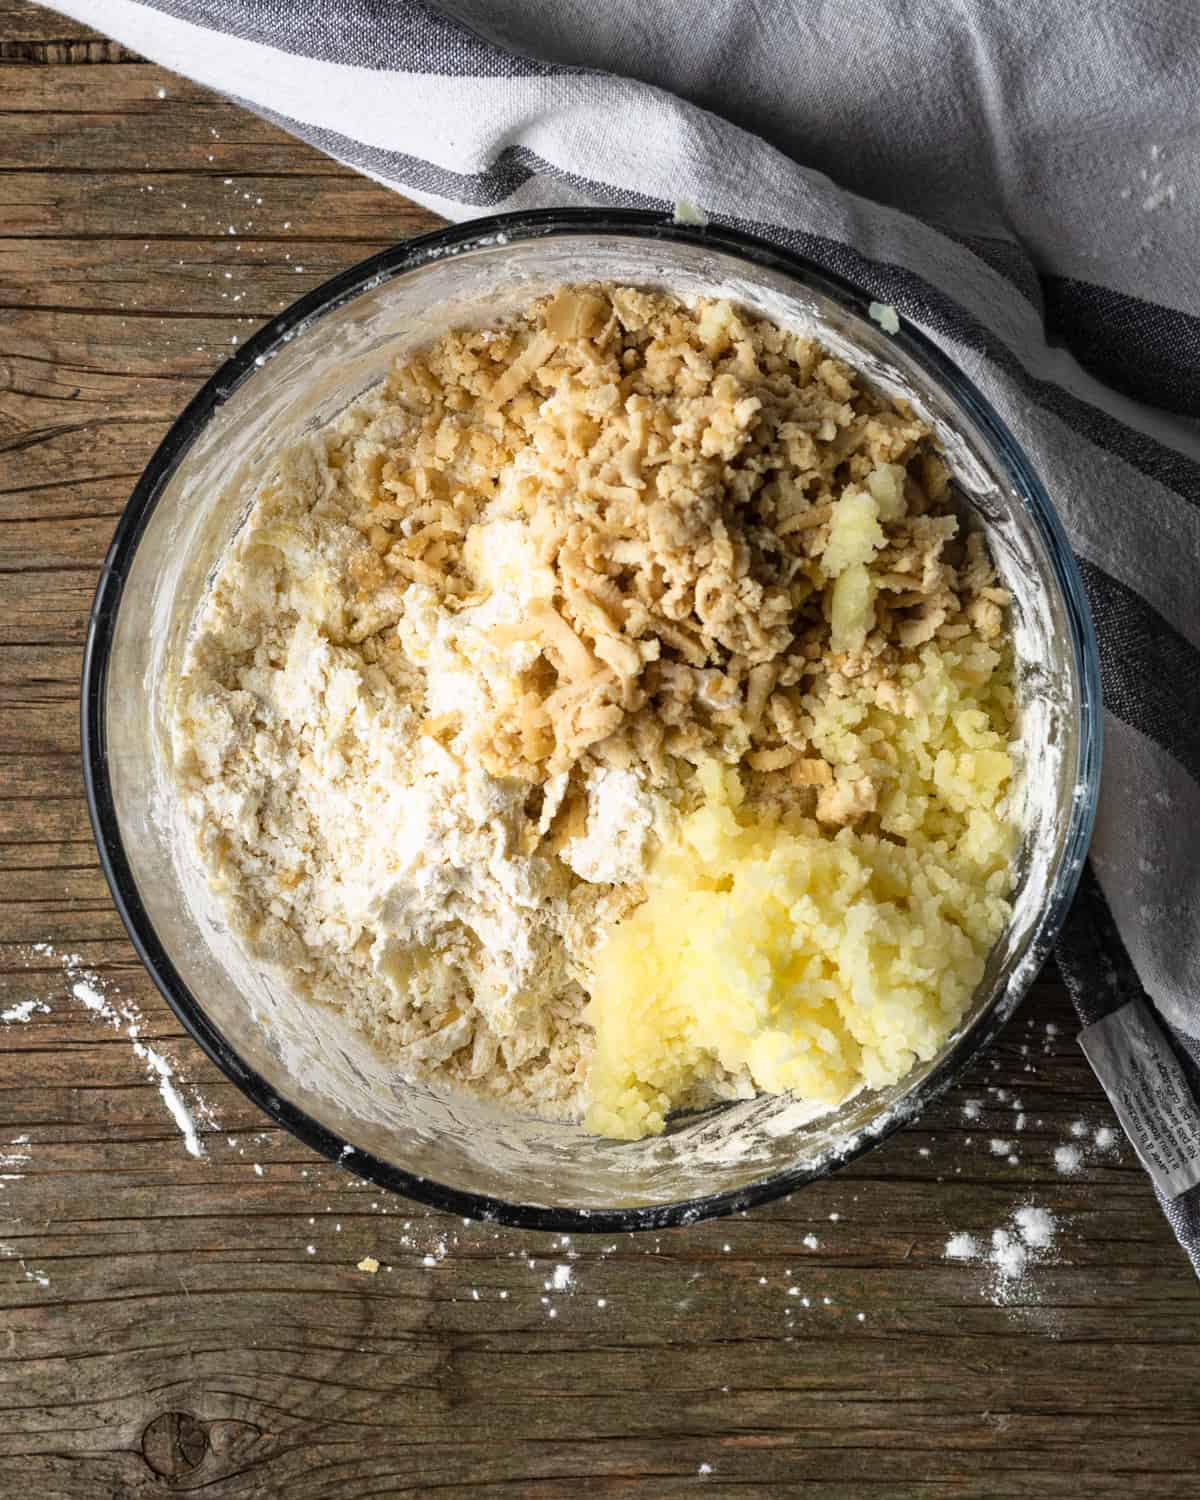 Image of a glass bowl with tapioca flour, mashed potatoes, vegan cheese, salt, and garlic powder. The image is a process shot for how to make Brazilian cheese bread balls.